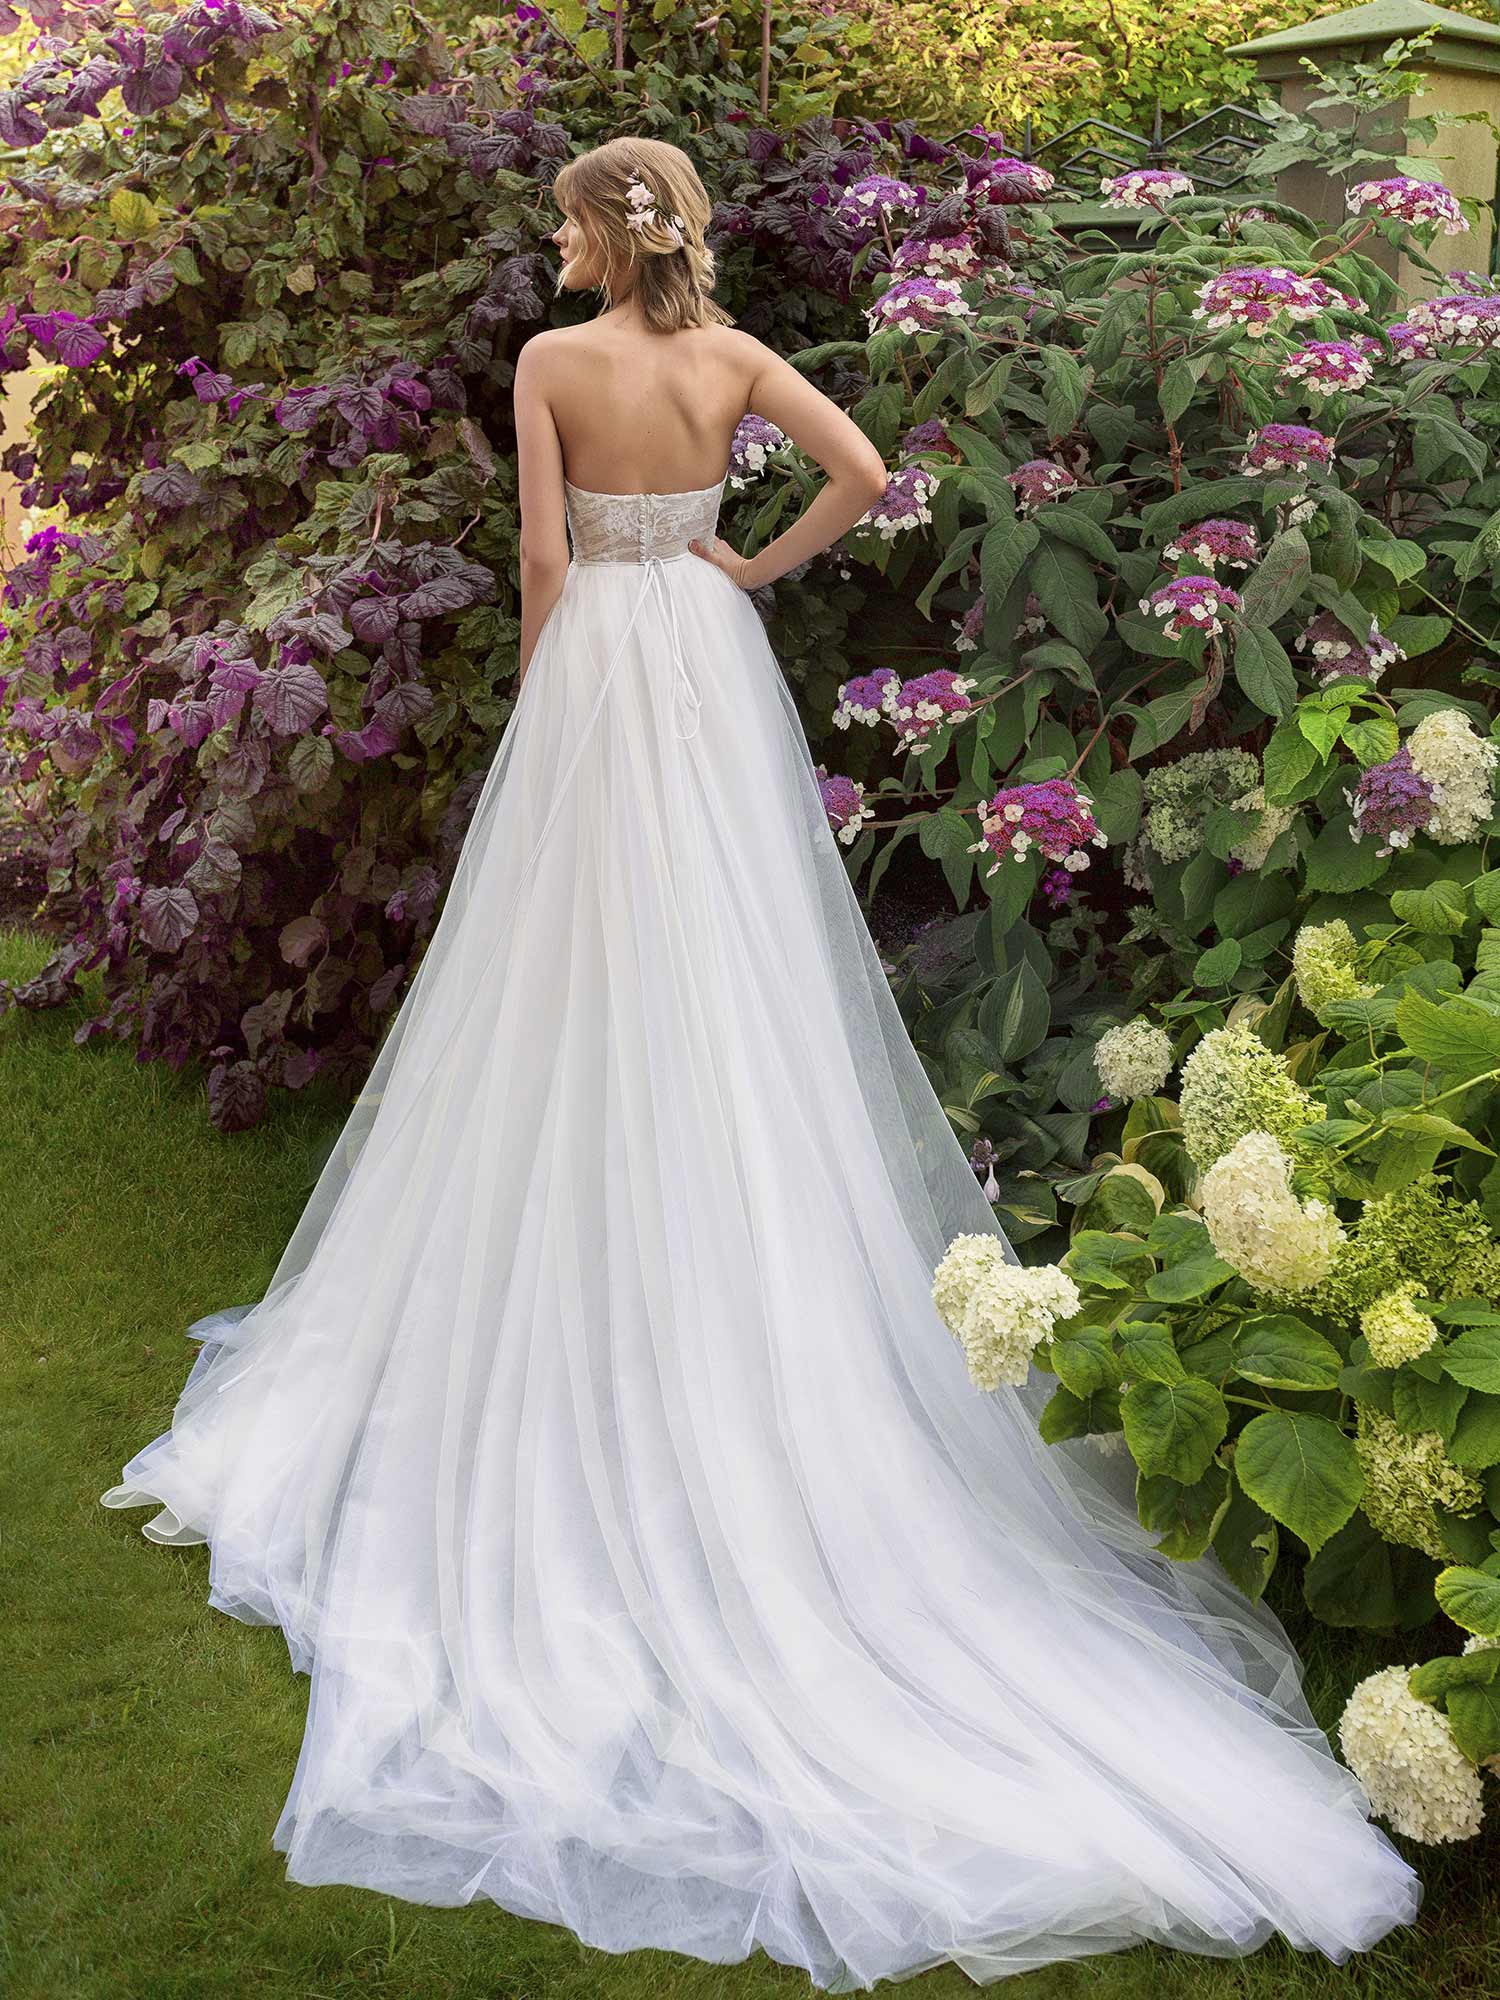 Strapless A-line wedding dress with a sweetheart bodice and tulle